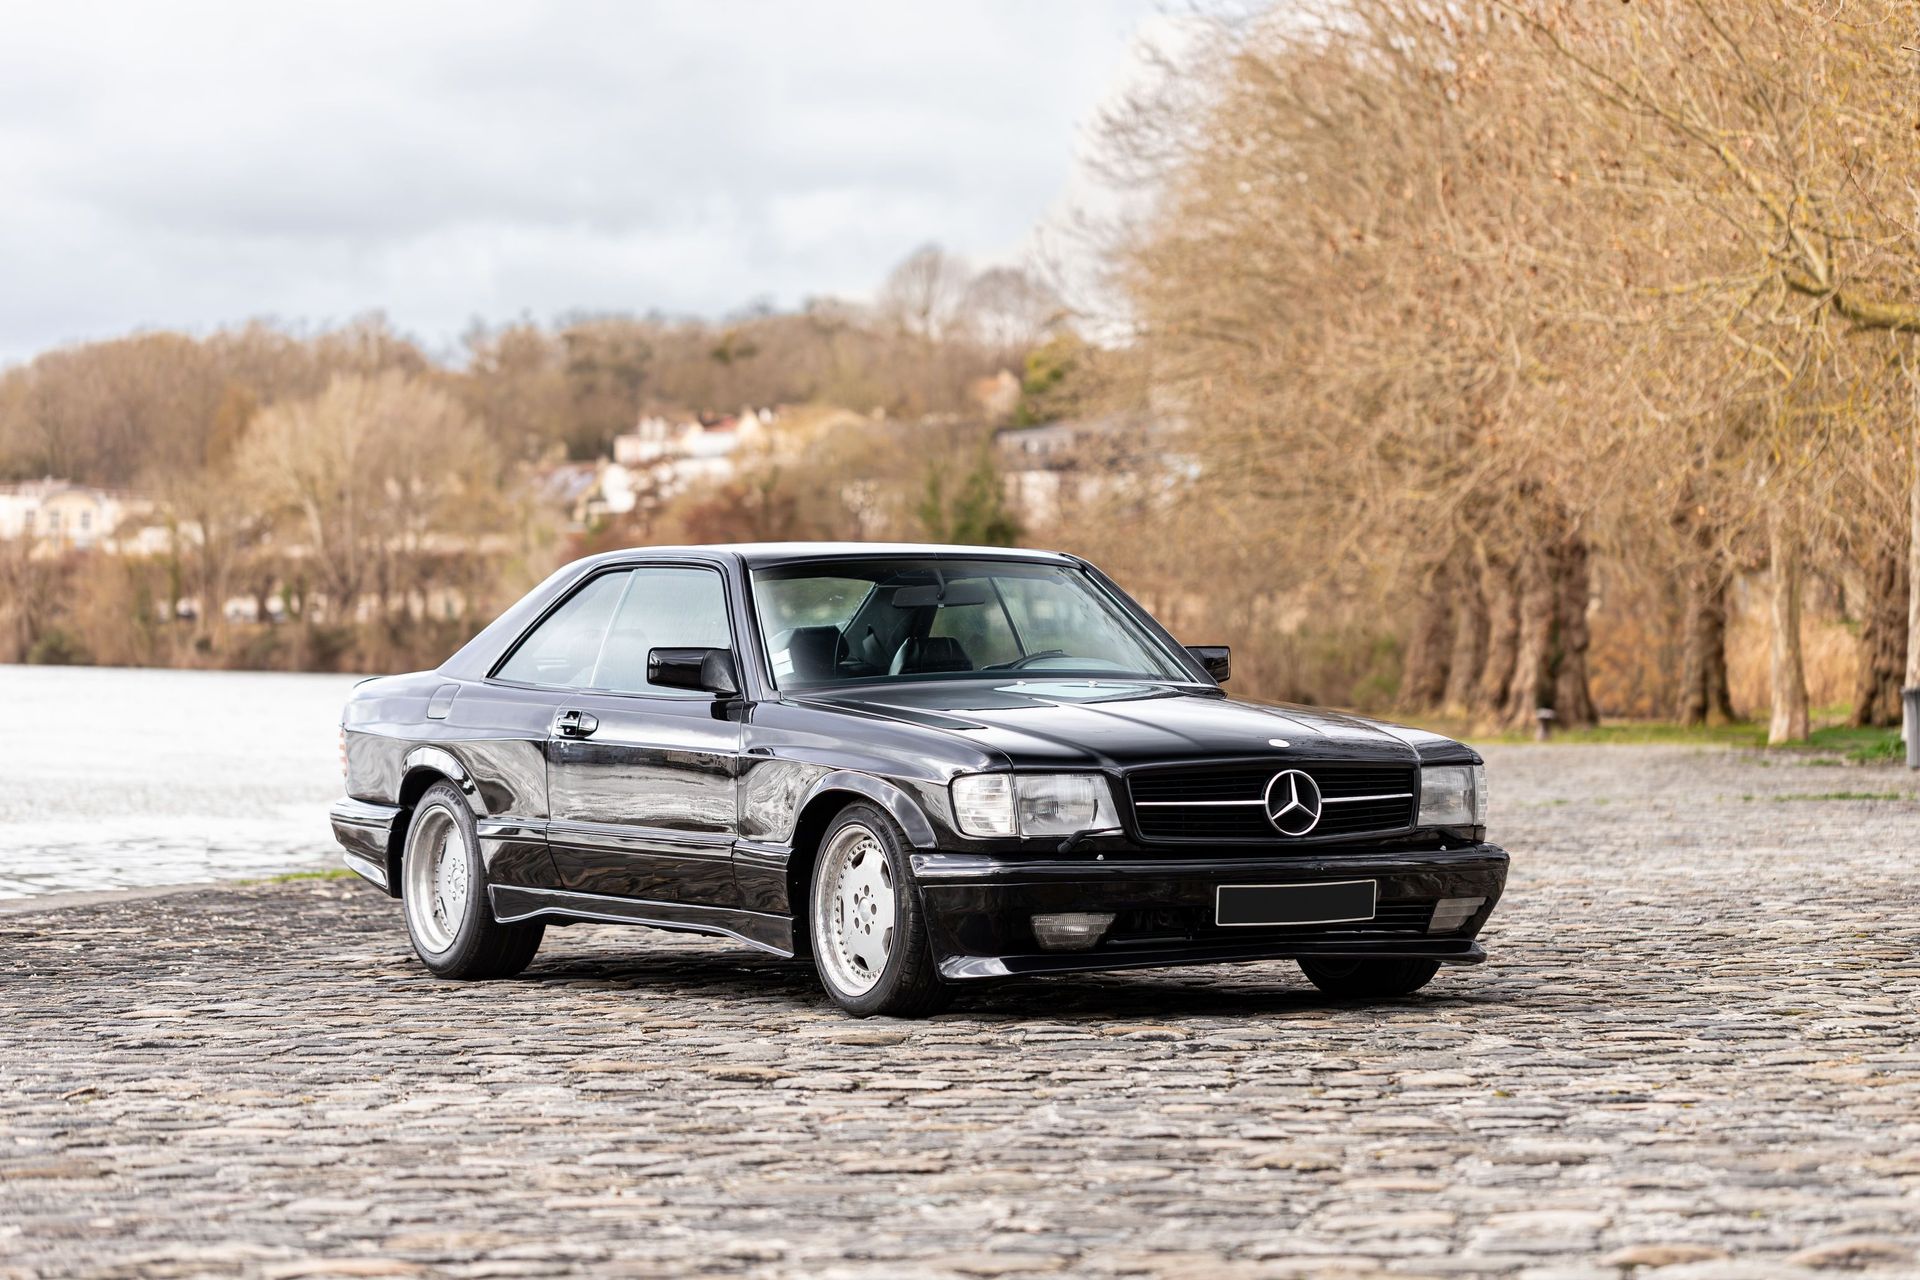 1989 – Mercedes-Benz 560 SEC « Wide body » French circulation permit 
Chassis n°&hellip;